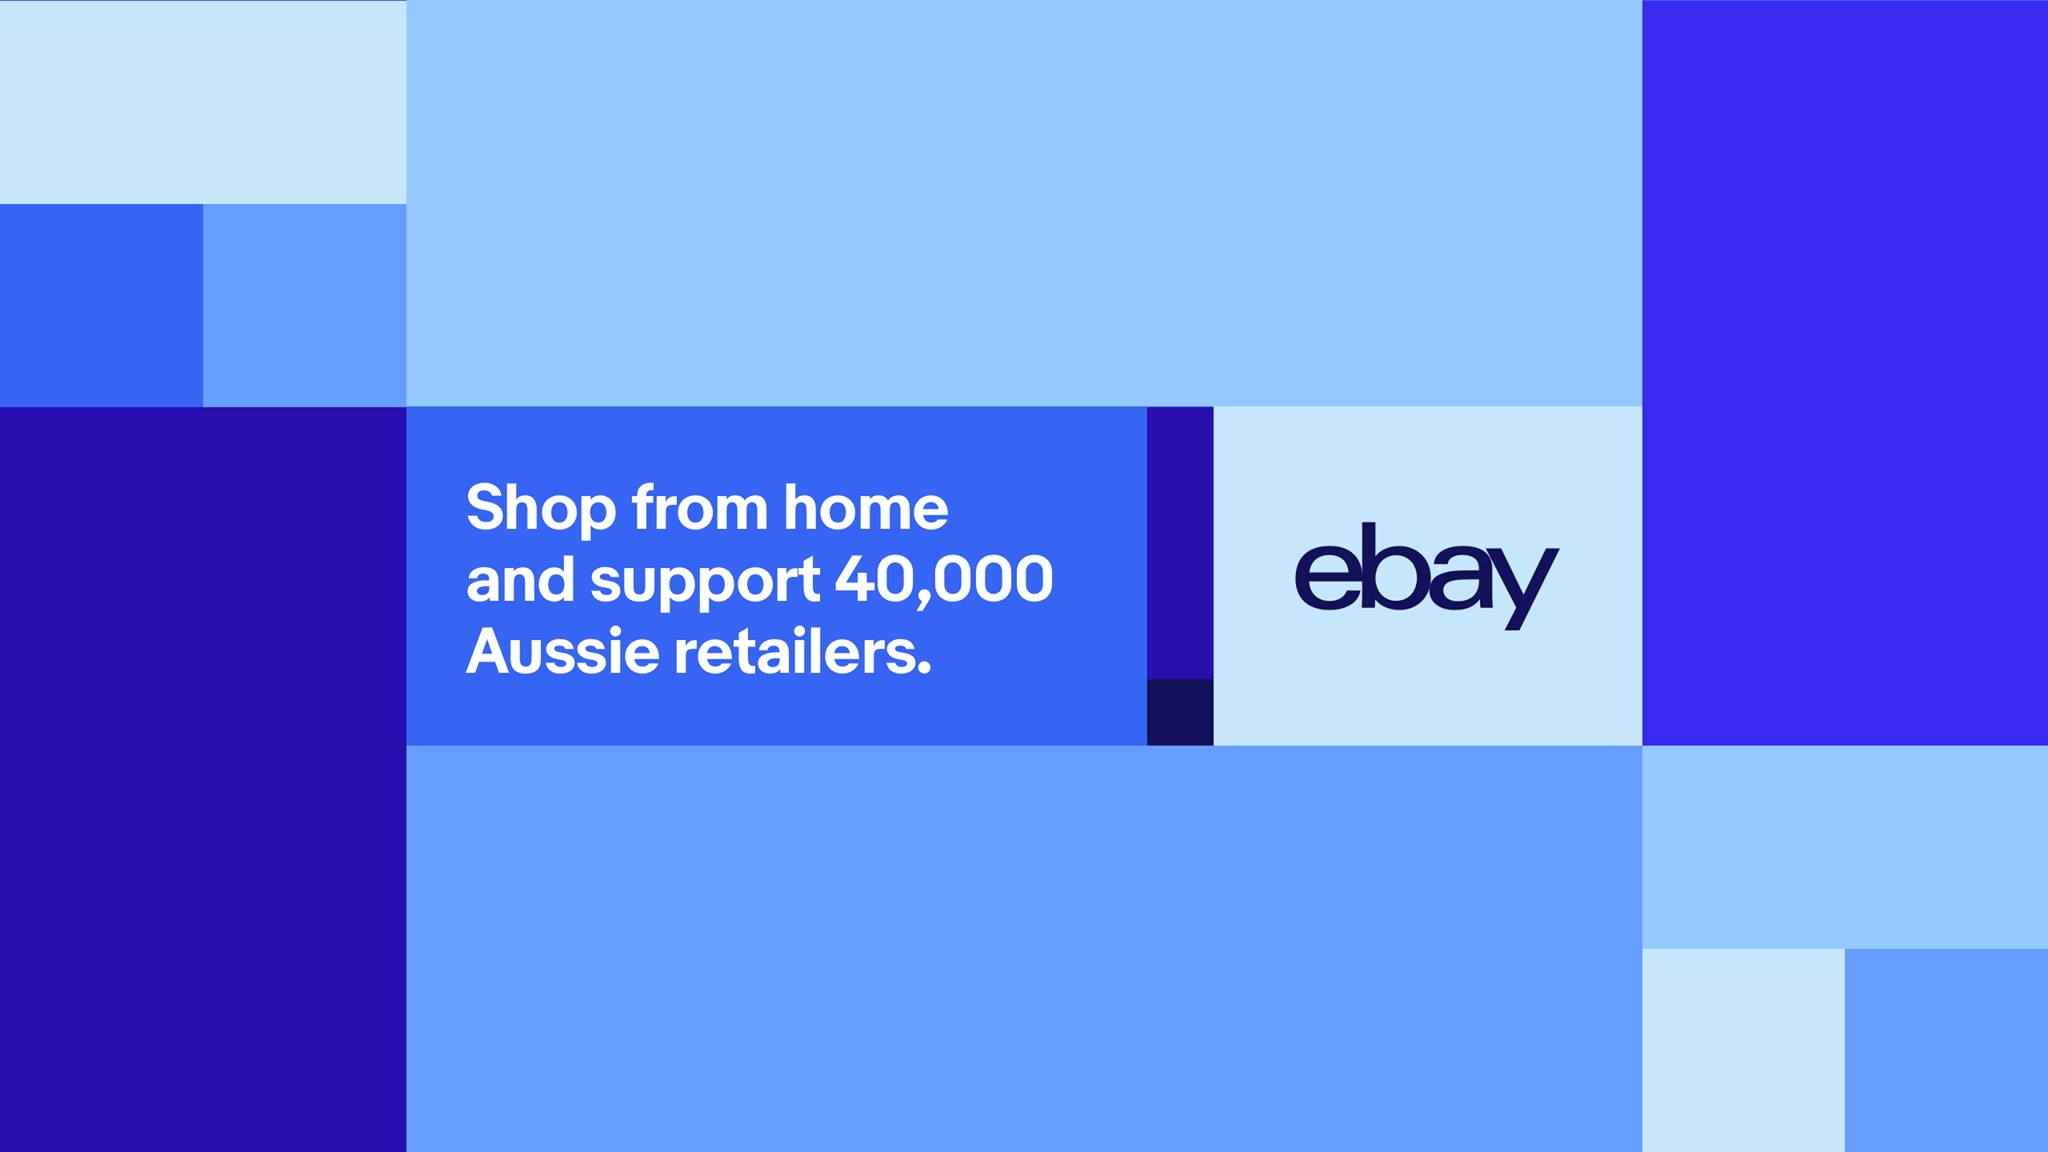 $10 OFF with min. spend $20 on eligible items using Afterpay with eBay voucher code